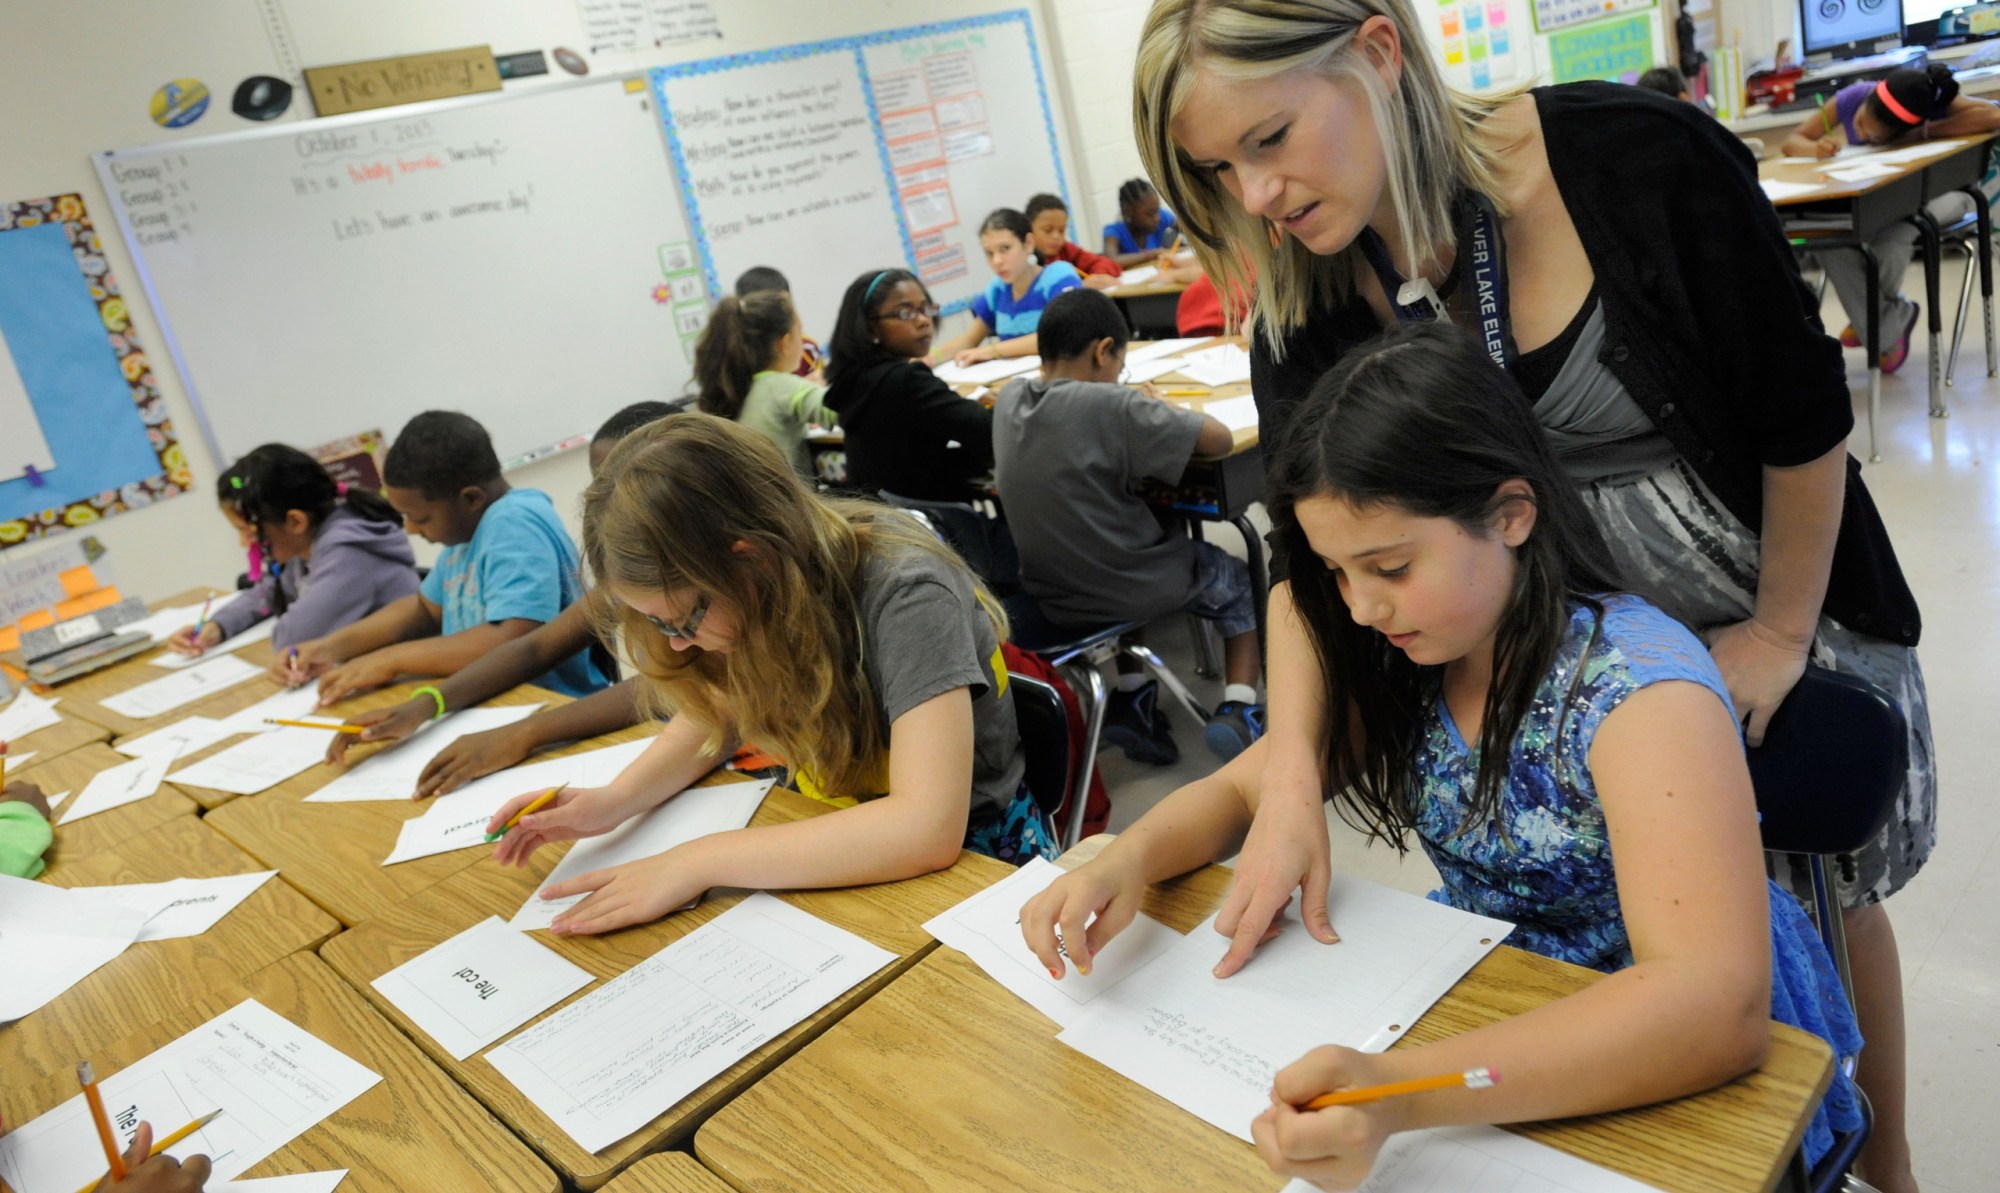 Amy Lawson, a fifth-grade teacher at Silver Lake Elementary School in Middletown, Delaware, helps student Melody Fritz with a language arts lesson. (AP/Steve Ruark)